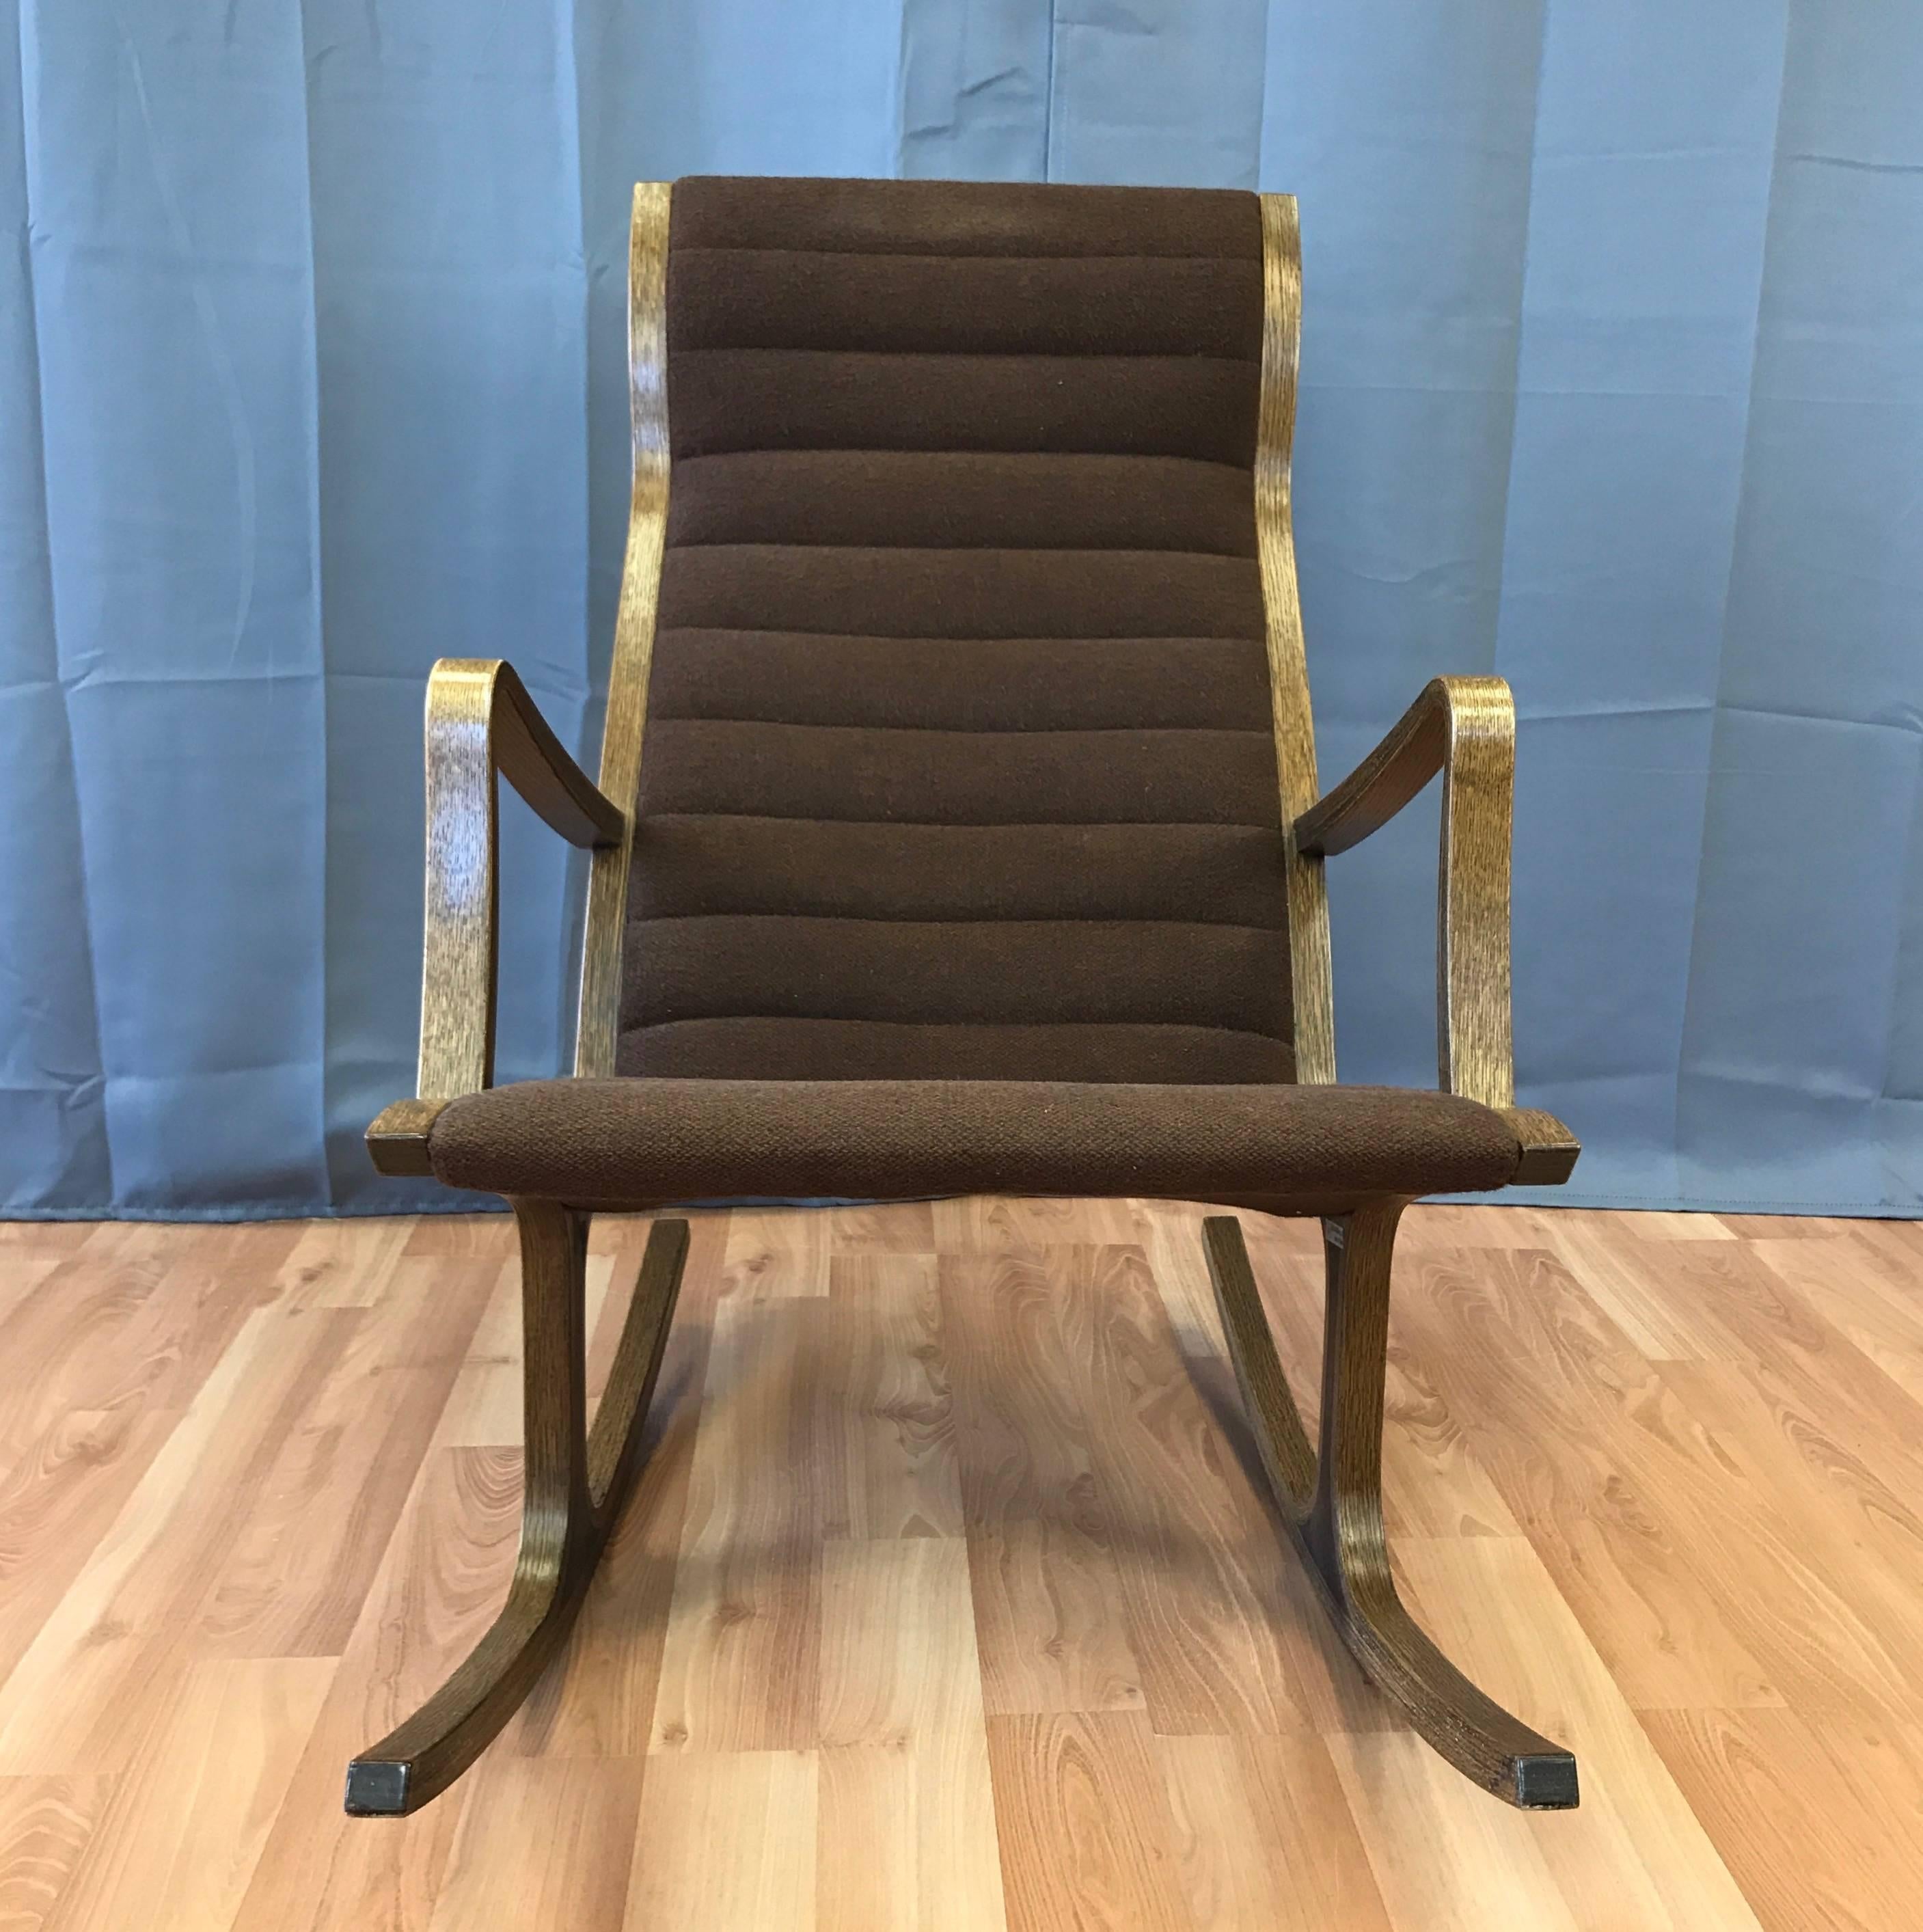 A Mid-Century Modern “Heron” high back rocking chair designed in 1966 by Mitsumasa Sugasawa for Tendo Mokko.

Bentwood oak frame and low profile upholstery strike a perfect balance between Minimalist lines and ergonomic comfort. Coffee-colored